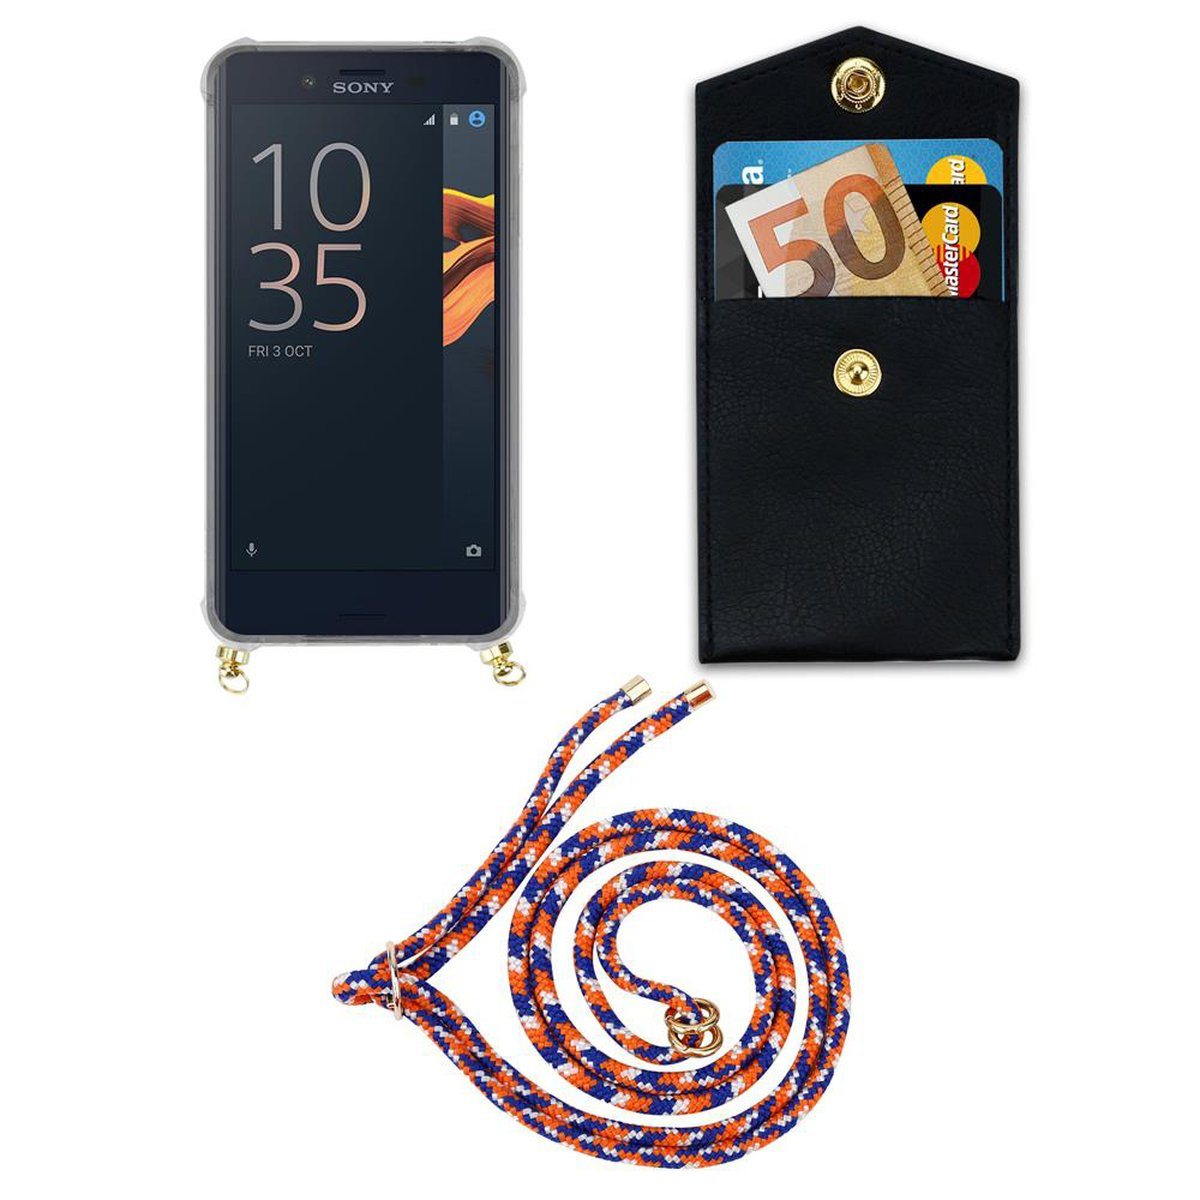 Handy und WEIß CADORABO mit BLAU COMPACT, ORANGE Kordel X Hülle, Gold abnehmbarer Kette Ringen, Backcover, Sony, Band Xperia